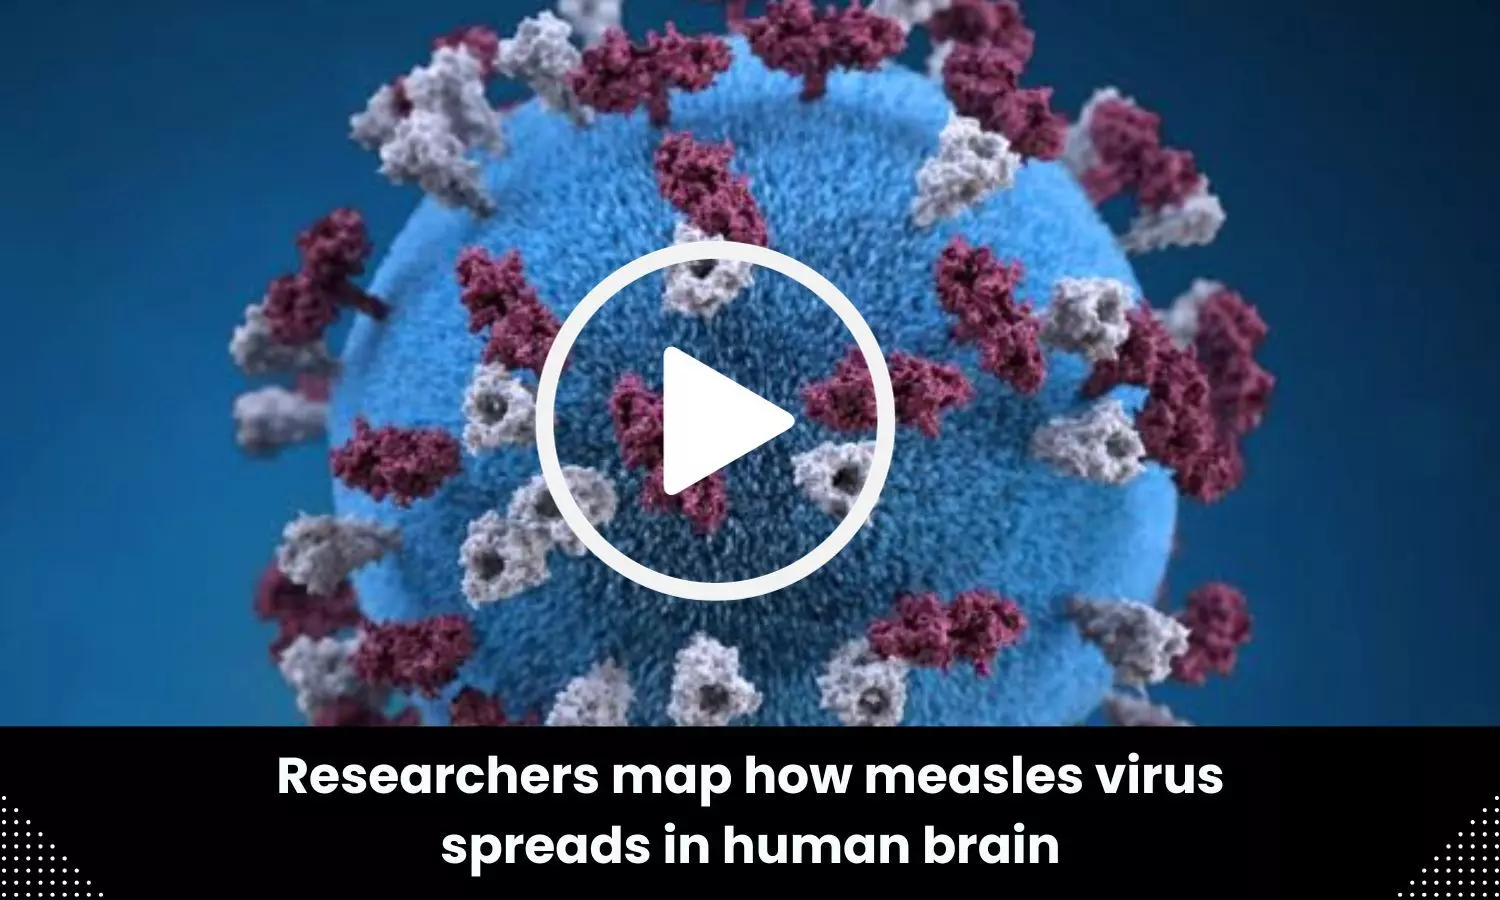 Researchers map how measles virus spreads in human brain